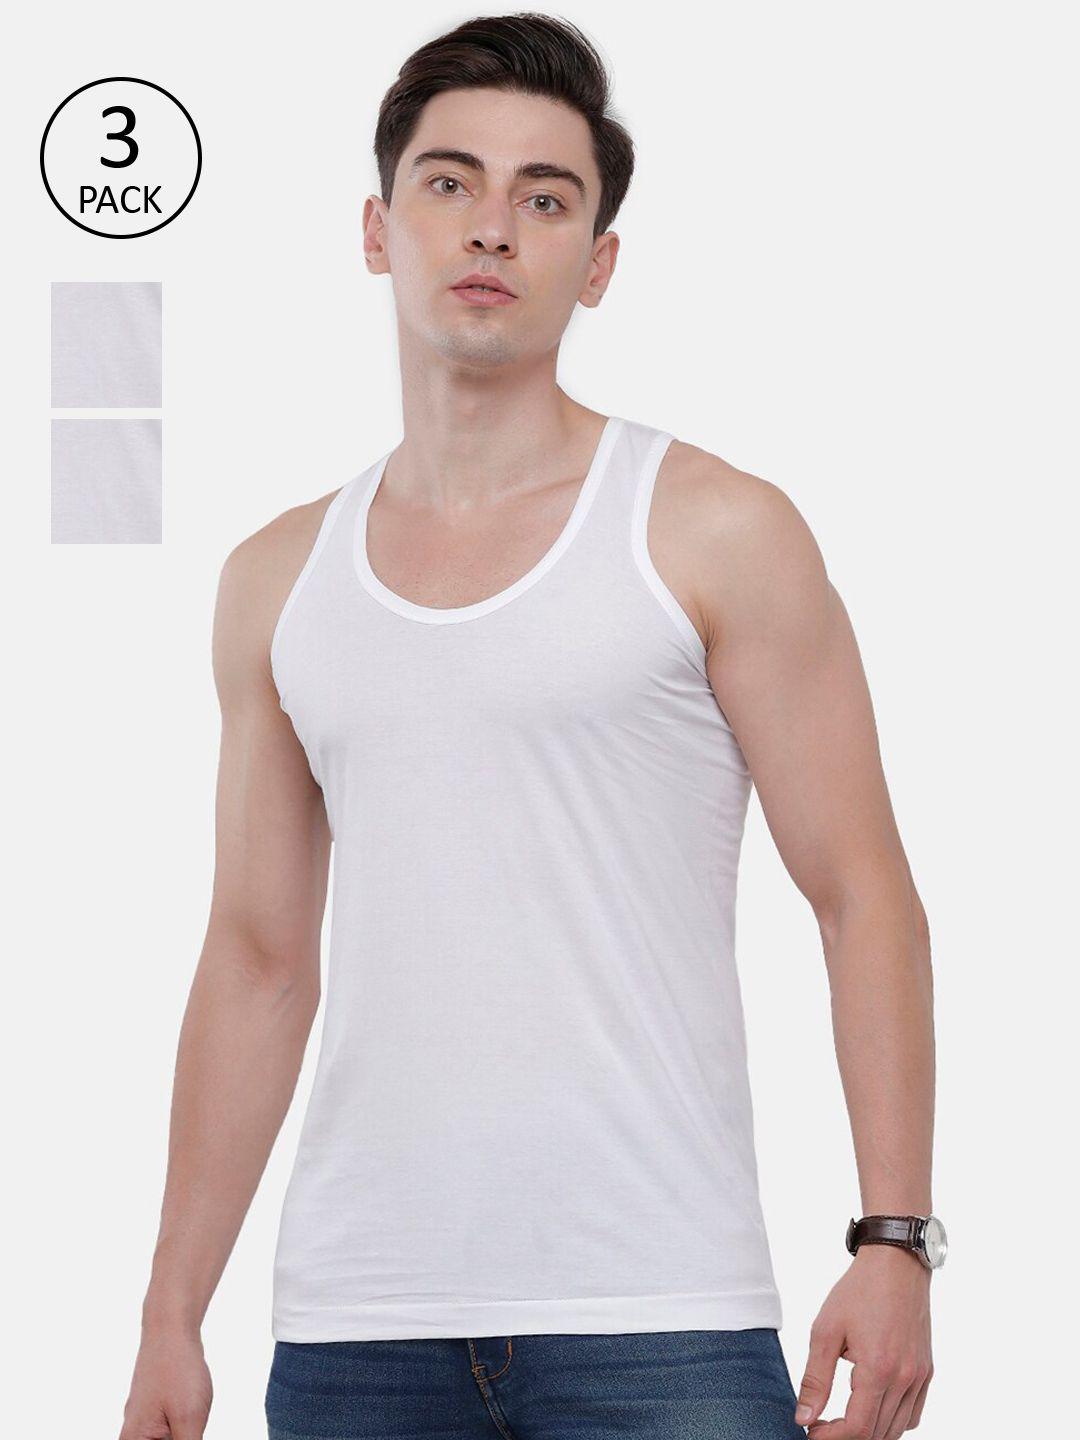 classic-polo-men-pack-of-3-white-solid-slim-fit-innerwear-vests